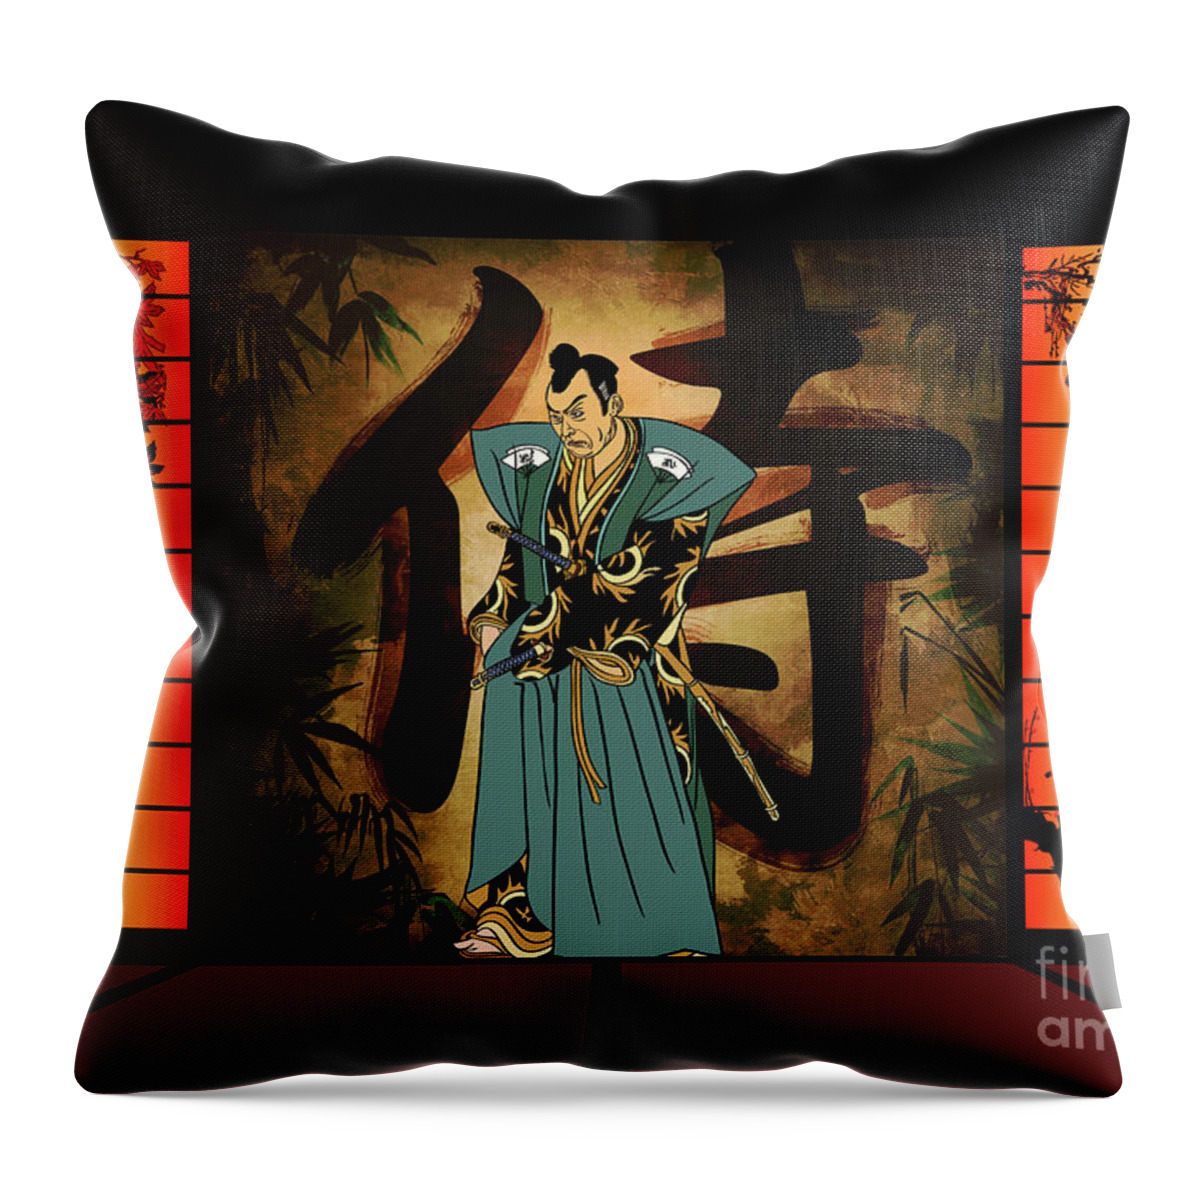 Room Throw Pillow featuring the drawing Japanese style by Andrzej Szczerski